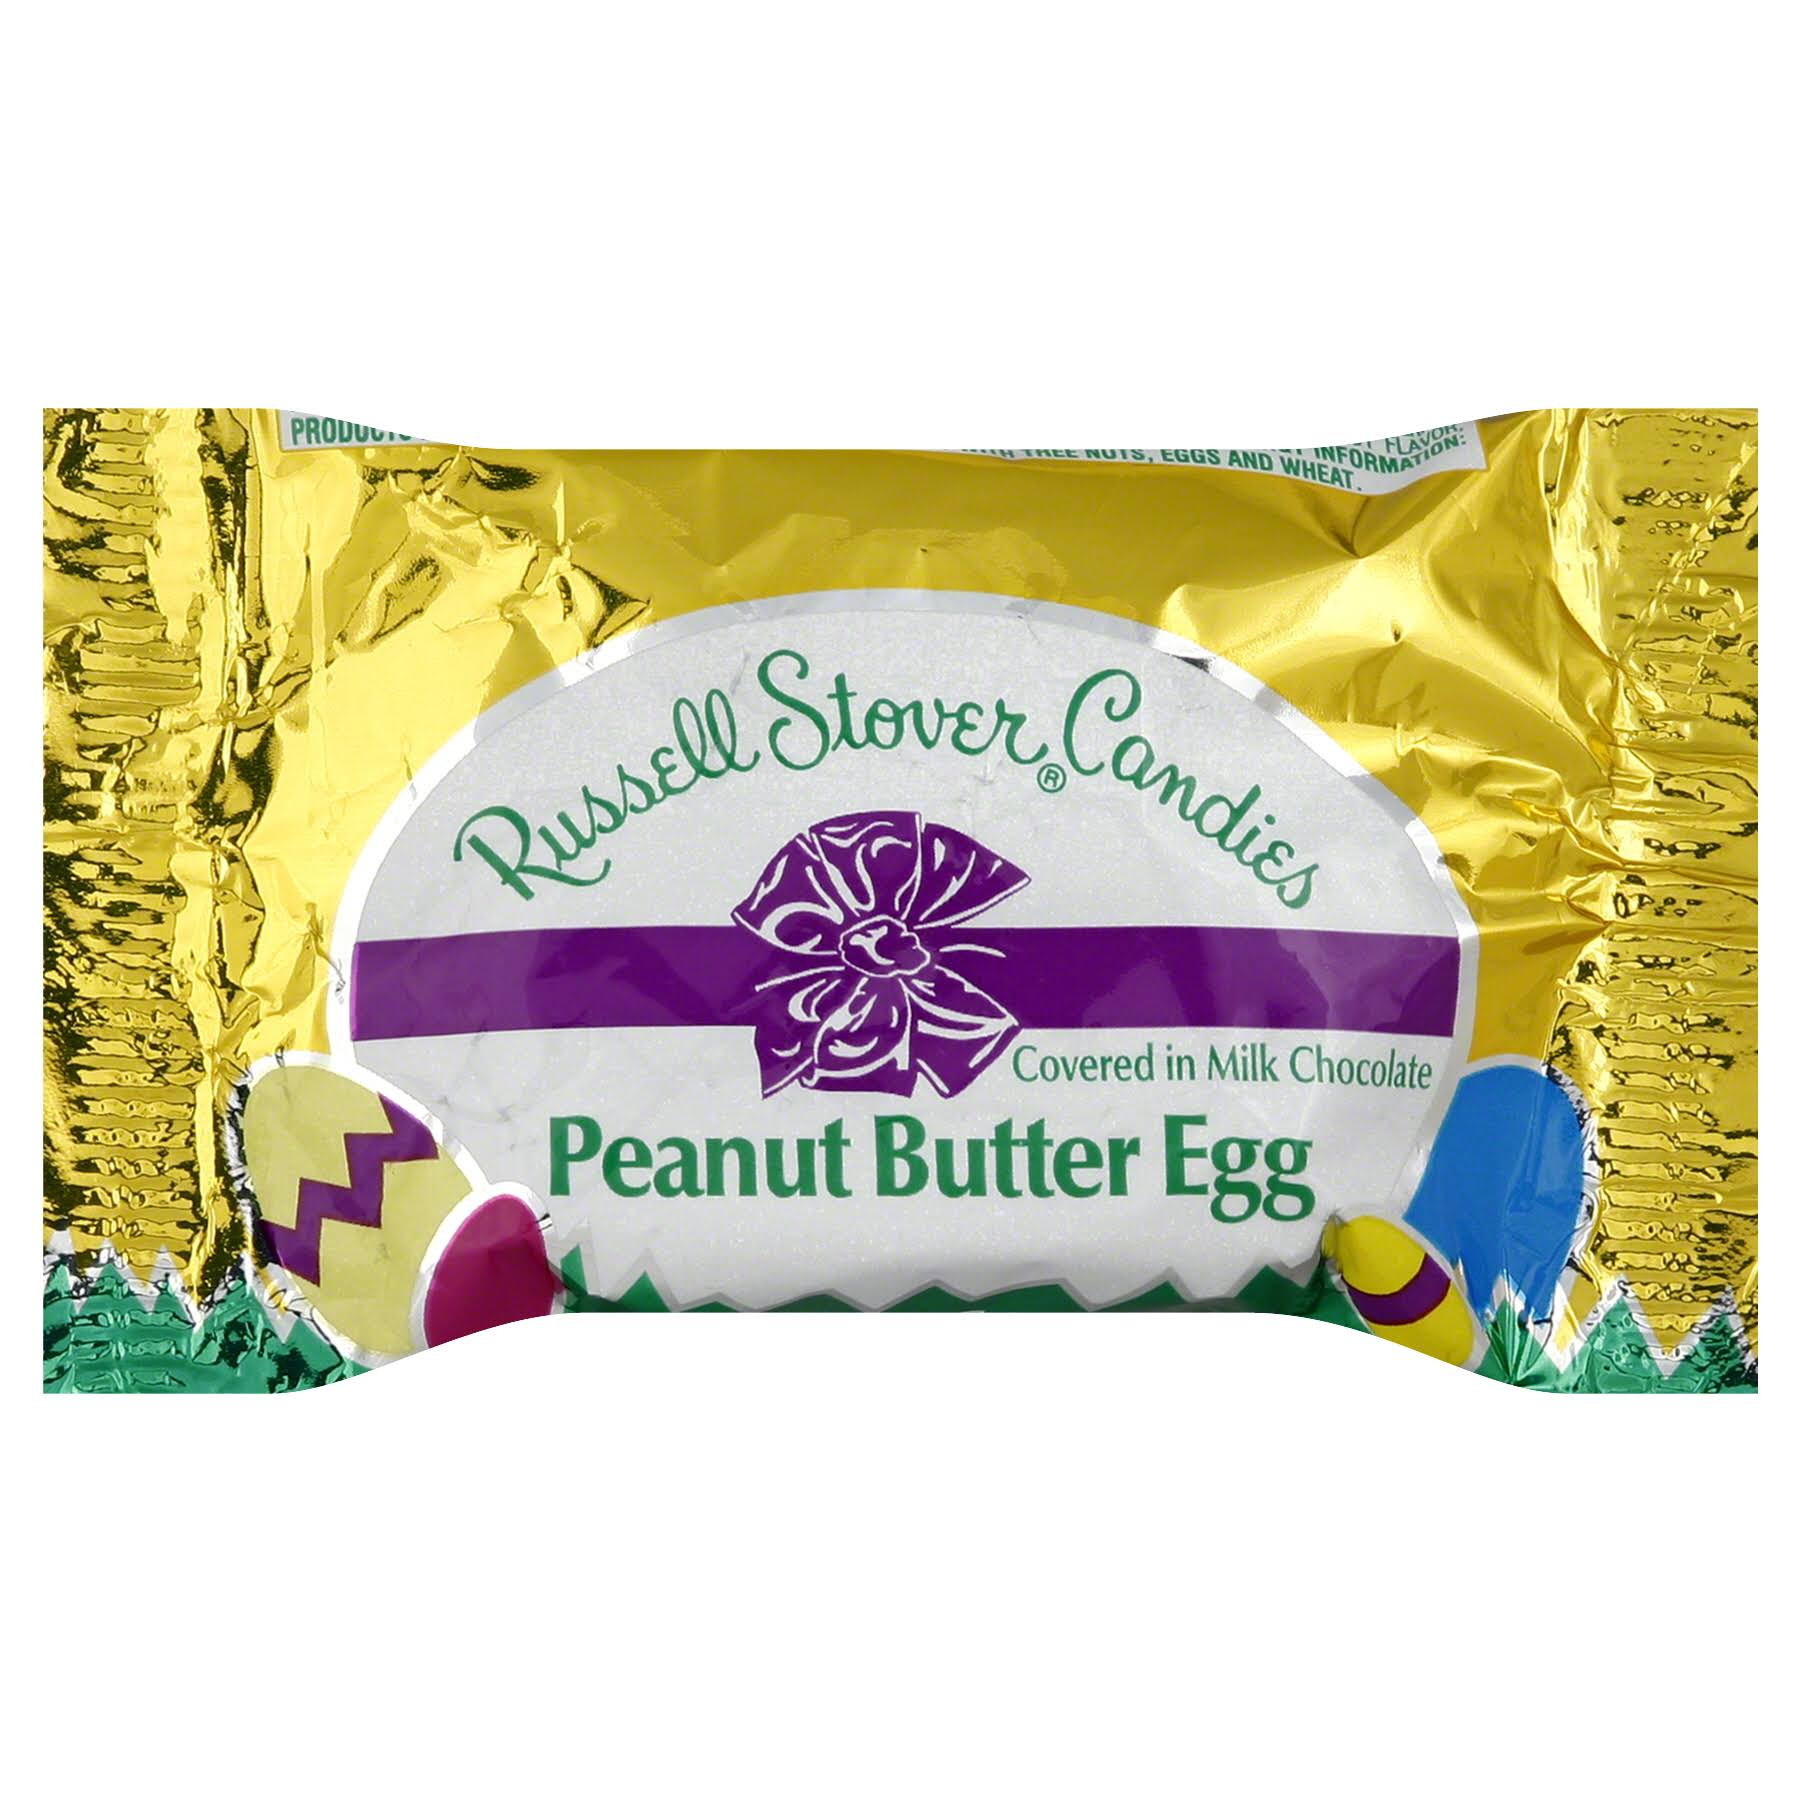 Russell Stover Candies, Peanut Butter Egg - 1 oz